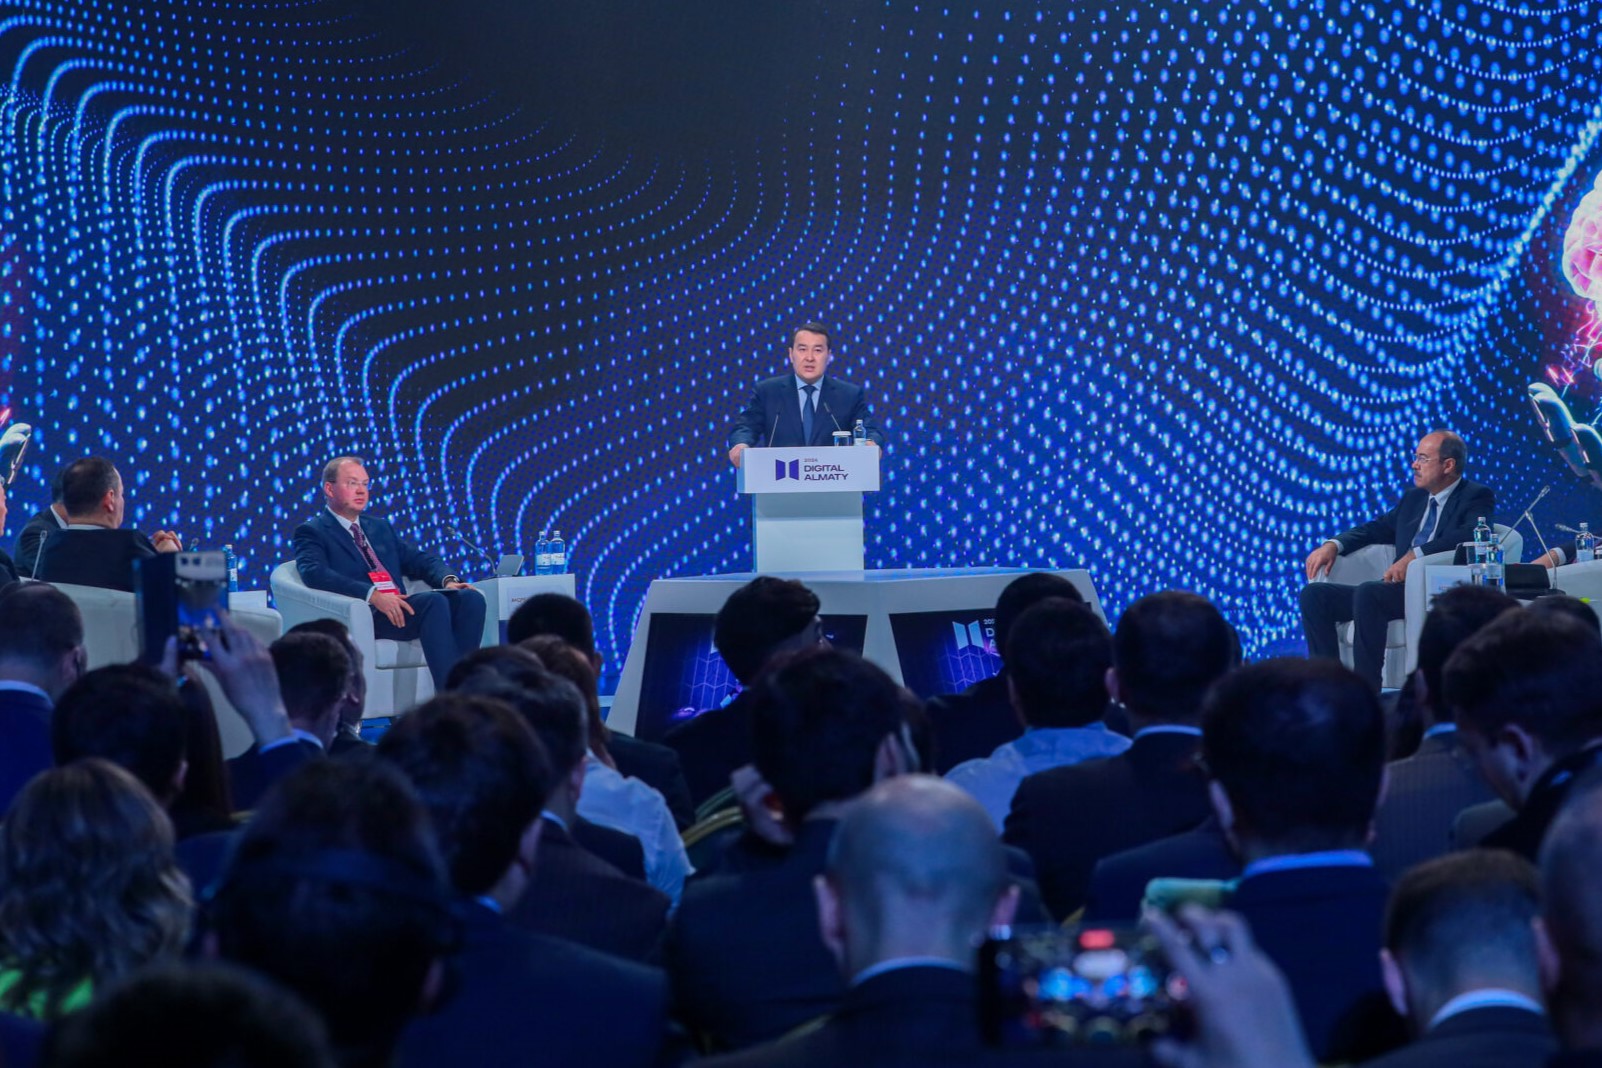 Kazakhstan’s PM Smailov addresses attendees at the Digital Almaty Forum. Source: Astana Times